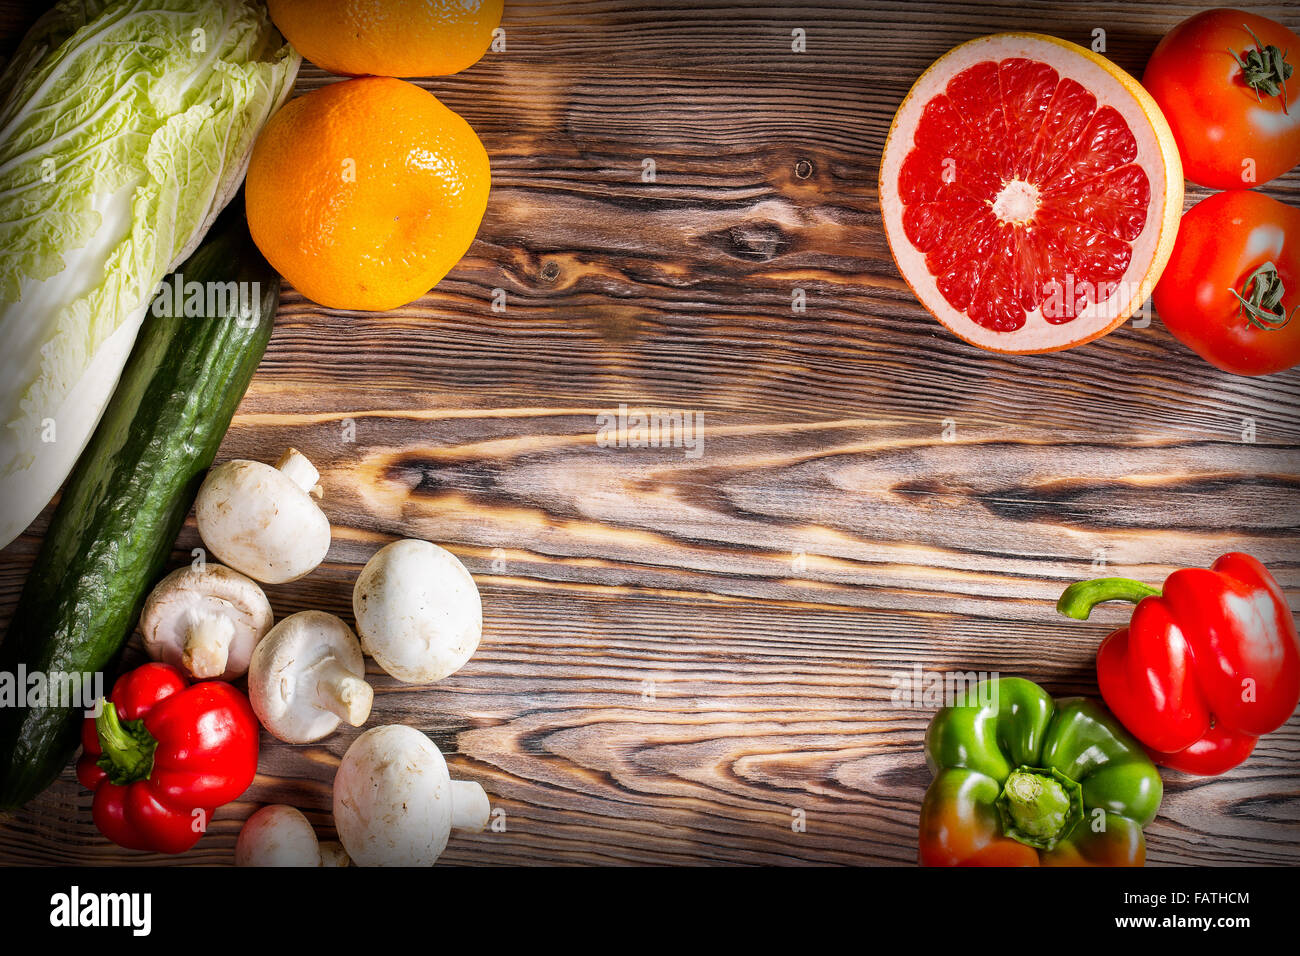 fruits and vegetables on the wooden background. Stock Photo